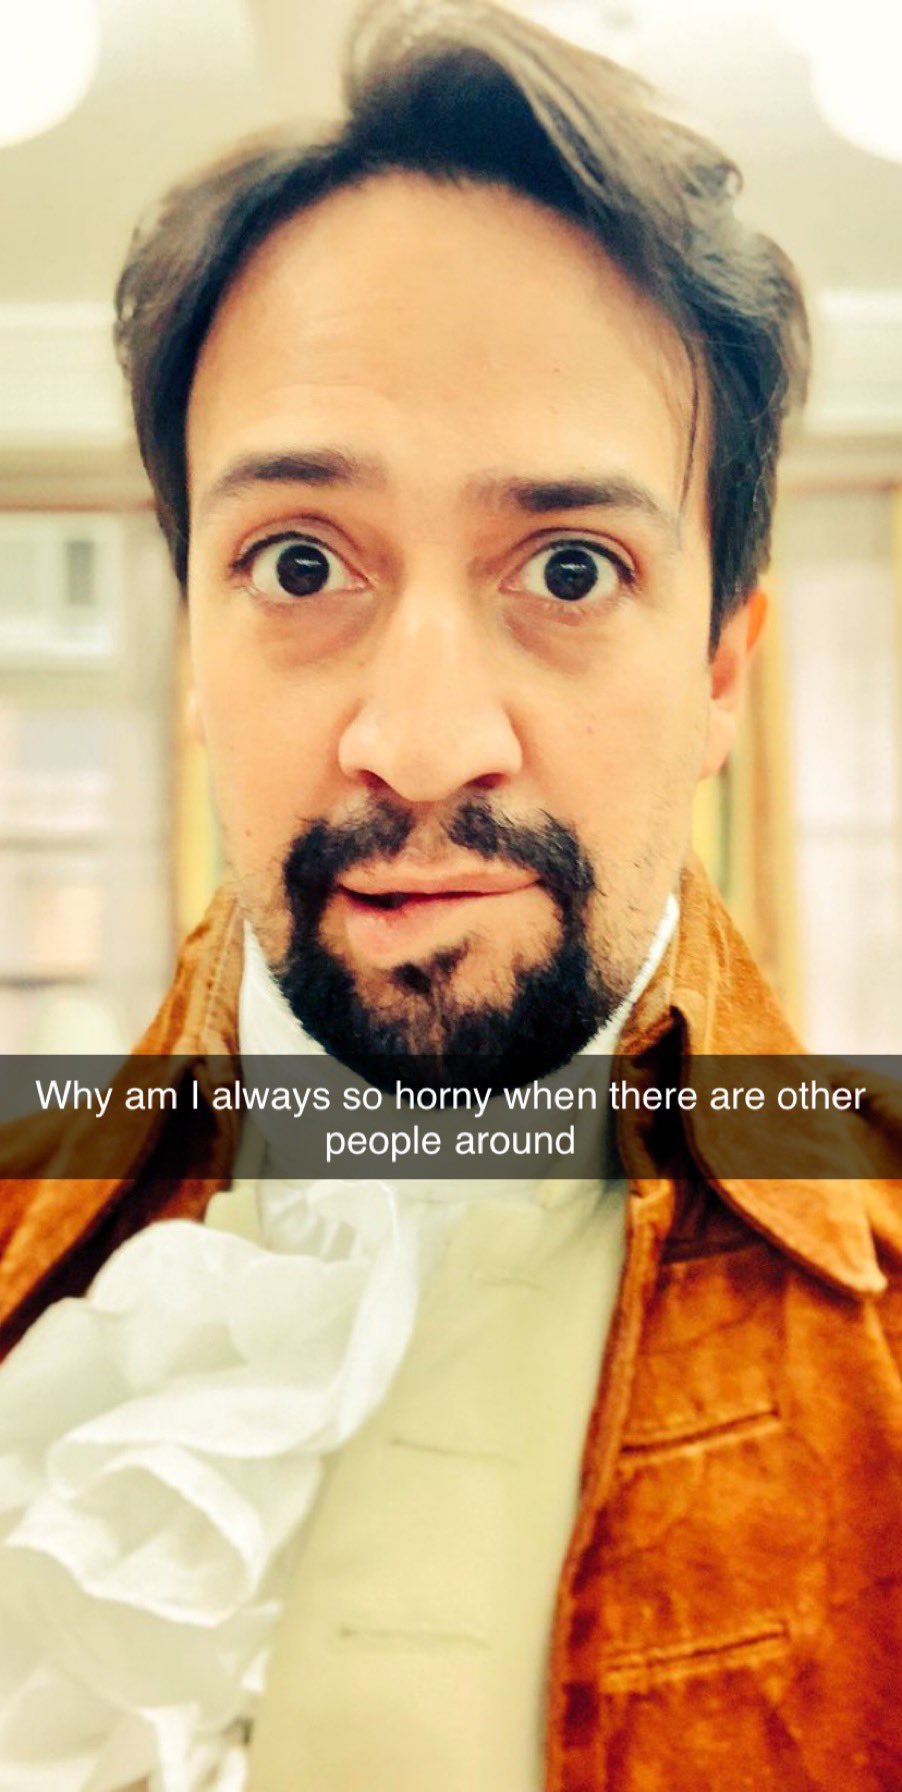 lin-manuel miranda lip biting lin manuel-miranda lip bite  lin manuelmiranda lip bite lin manuel miranda lip bite - Why am I always so horny when there are other people around